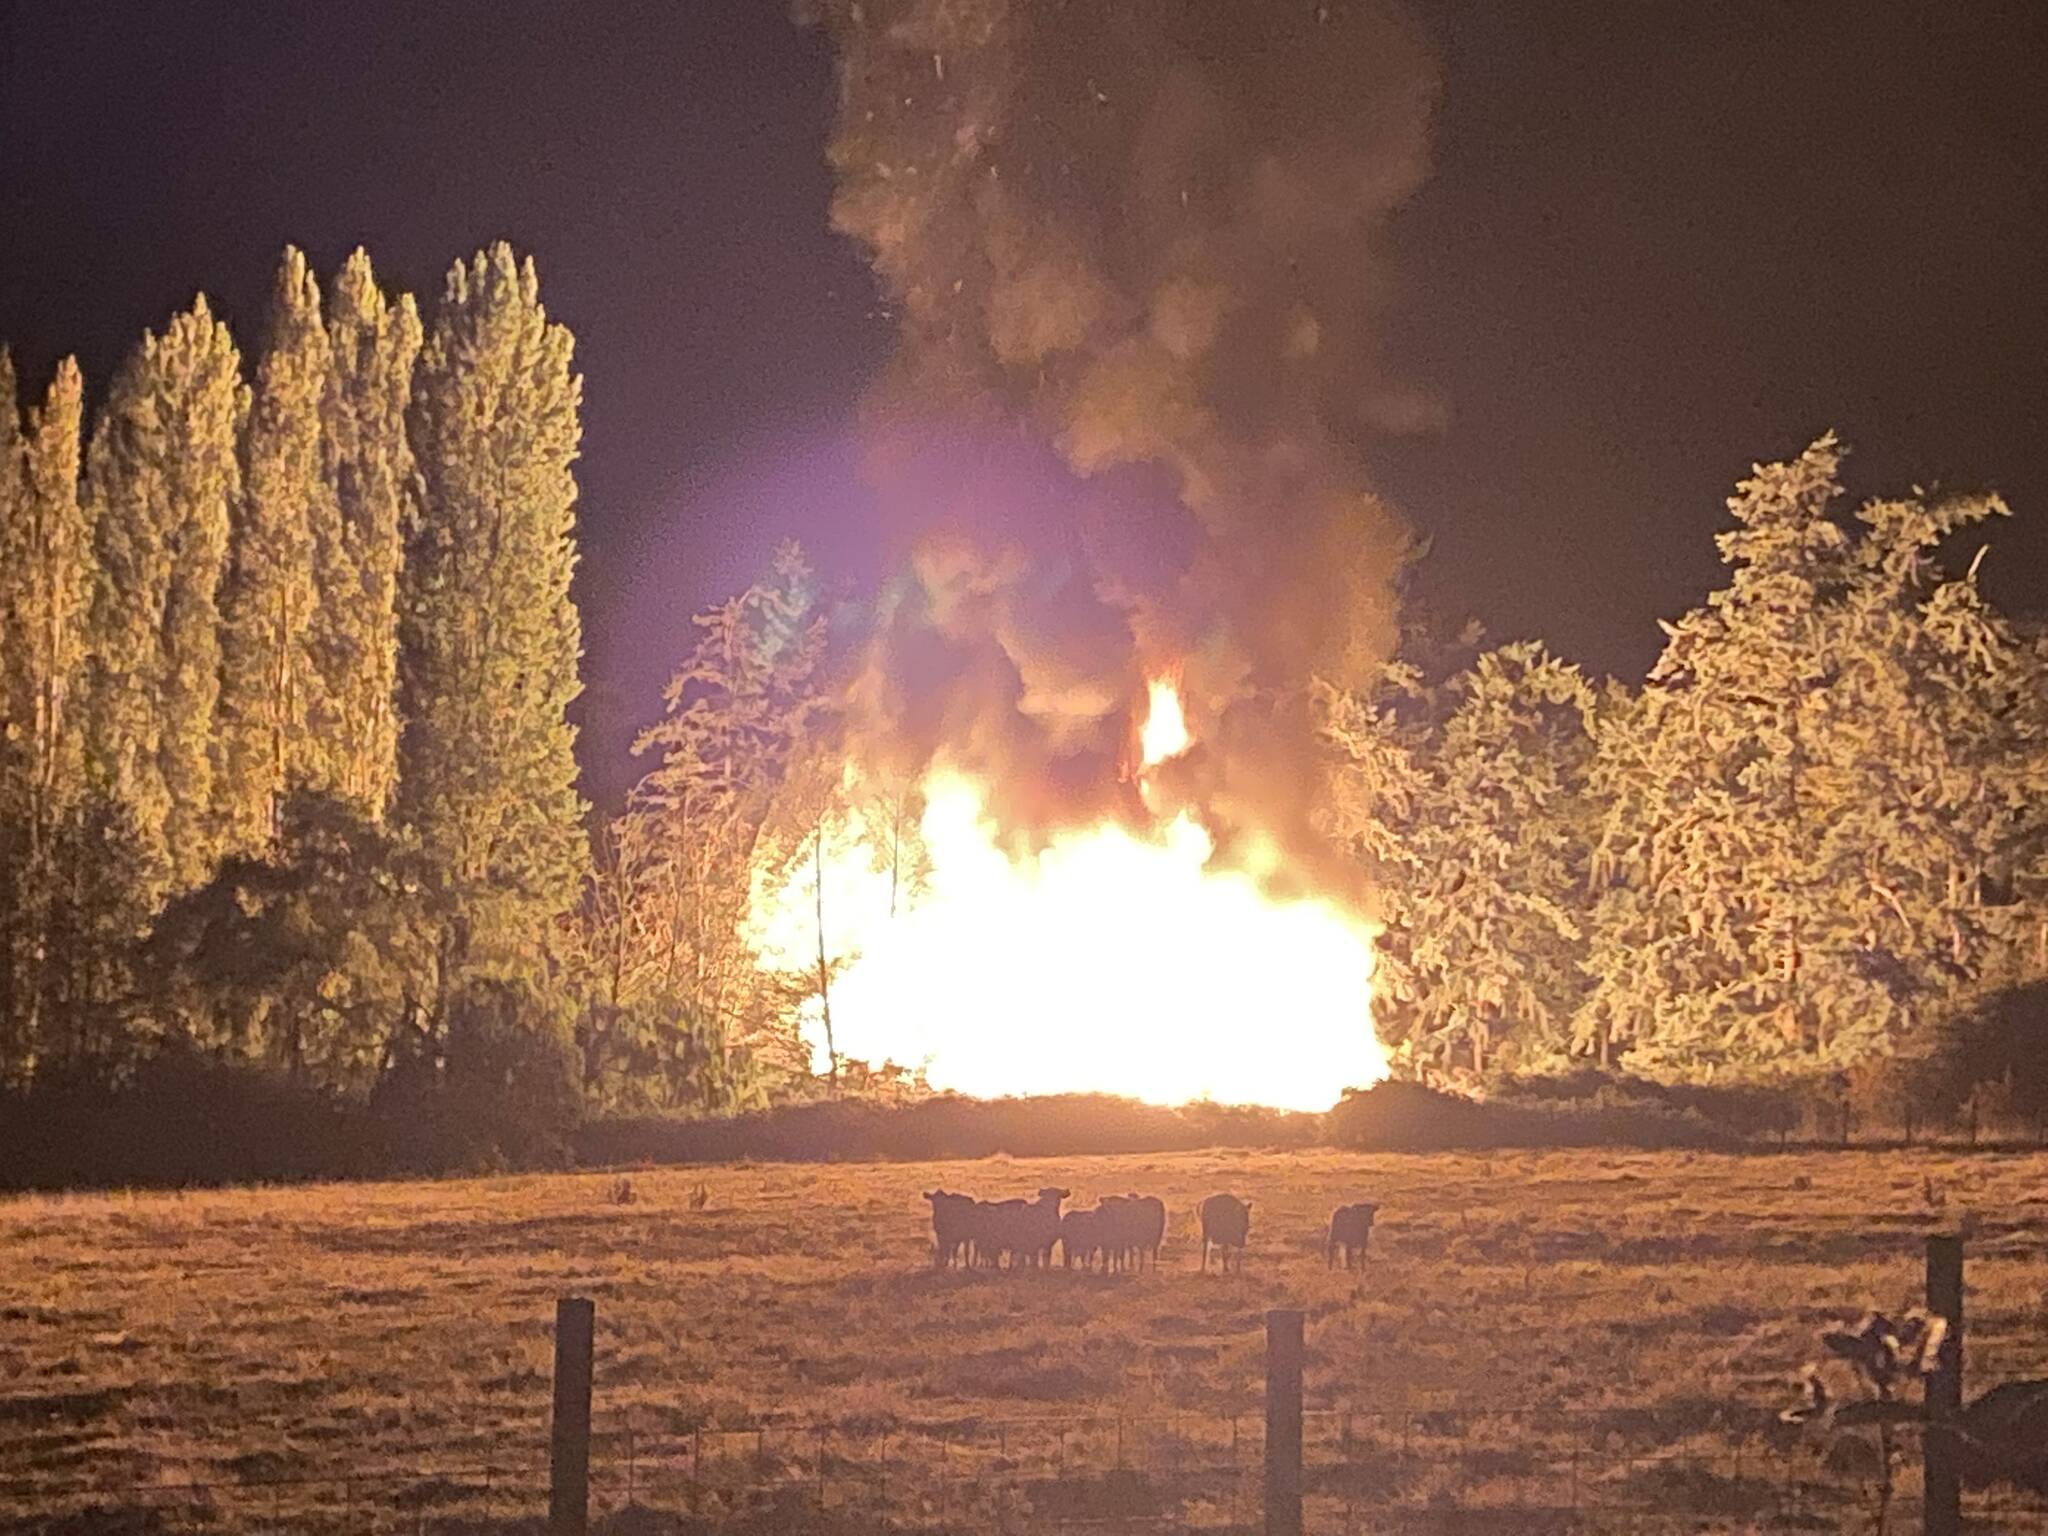 Photo by Zach Loescher
A barn on Fakkema Road caught fire early Tuesday morning. No animals were in the barn and no one else on the property was injured.